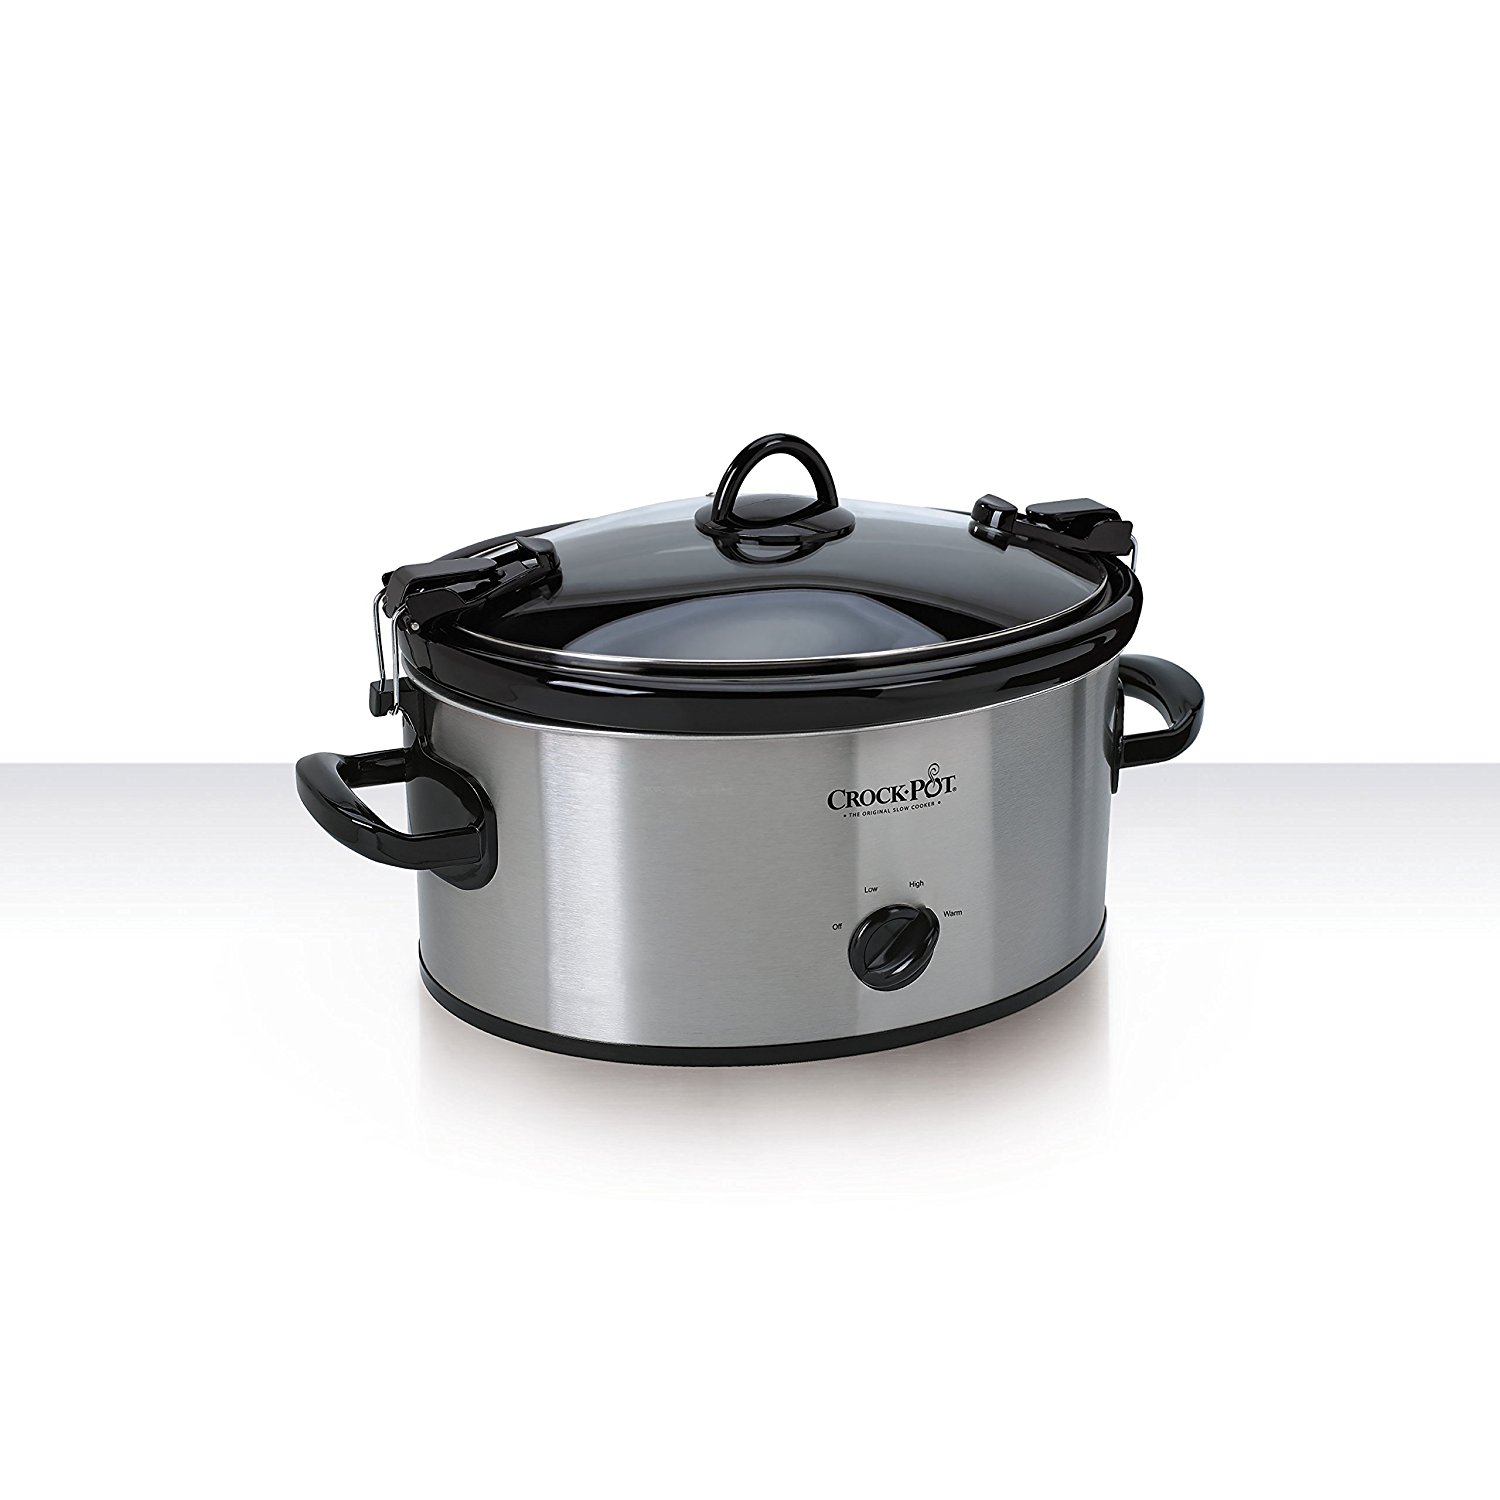 Crock-Pot Cook and Carry 6 Quart Oval Manual Portable Stainless Steel Slow Cooker - image 5 of 8